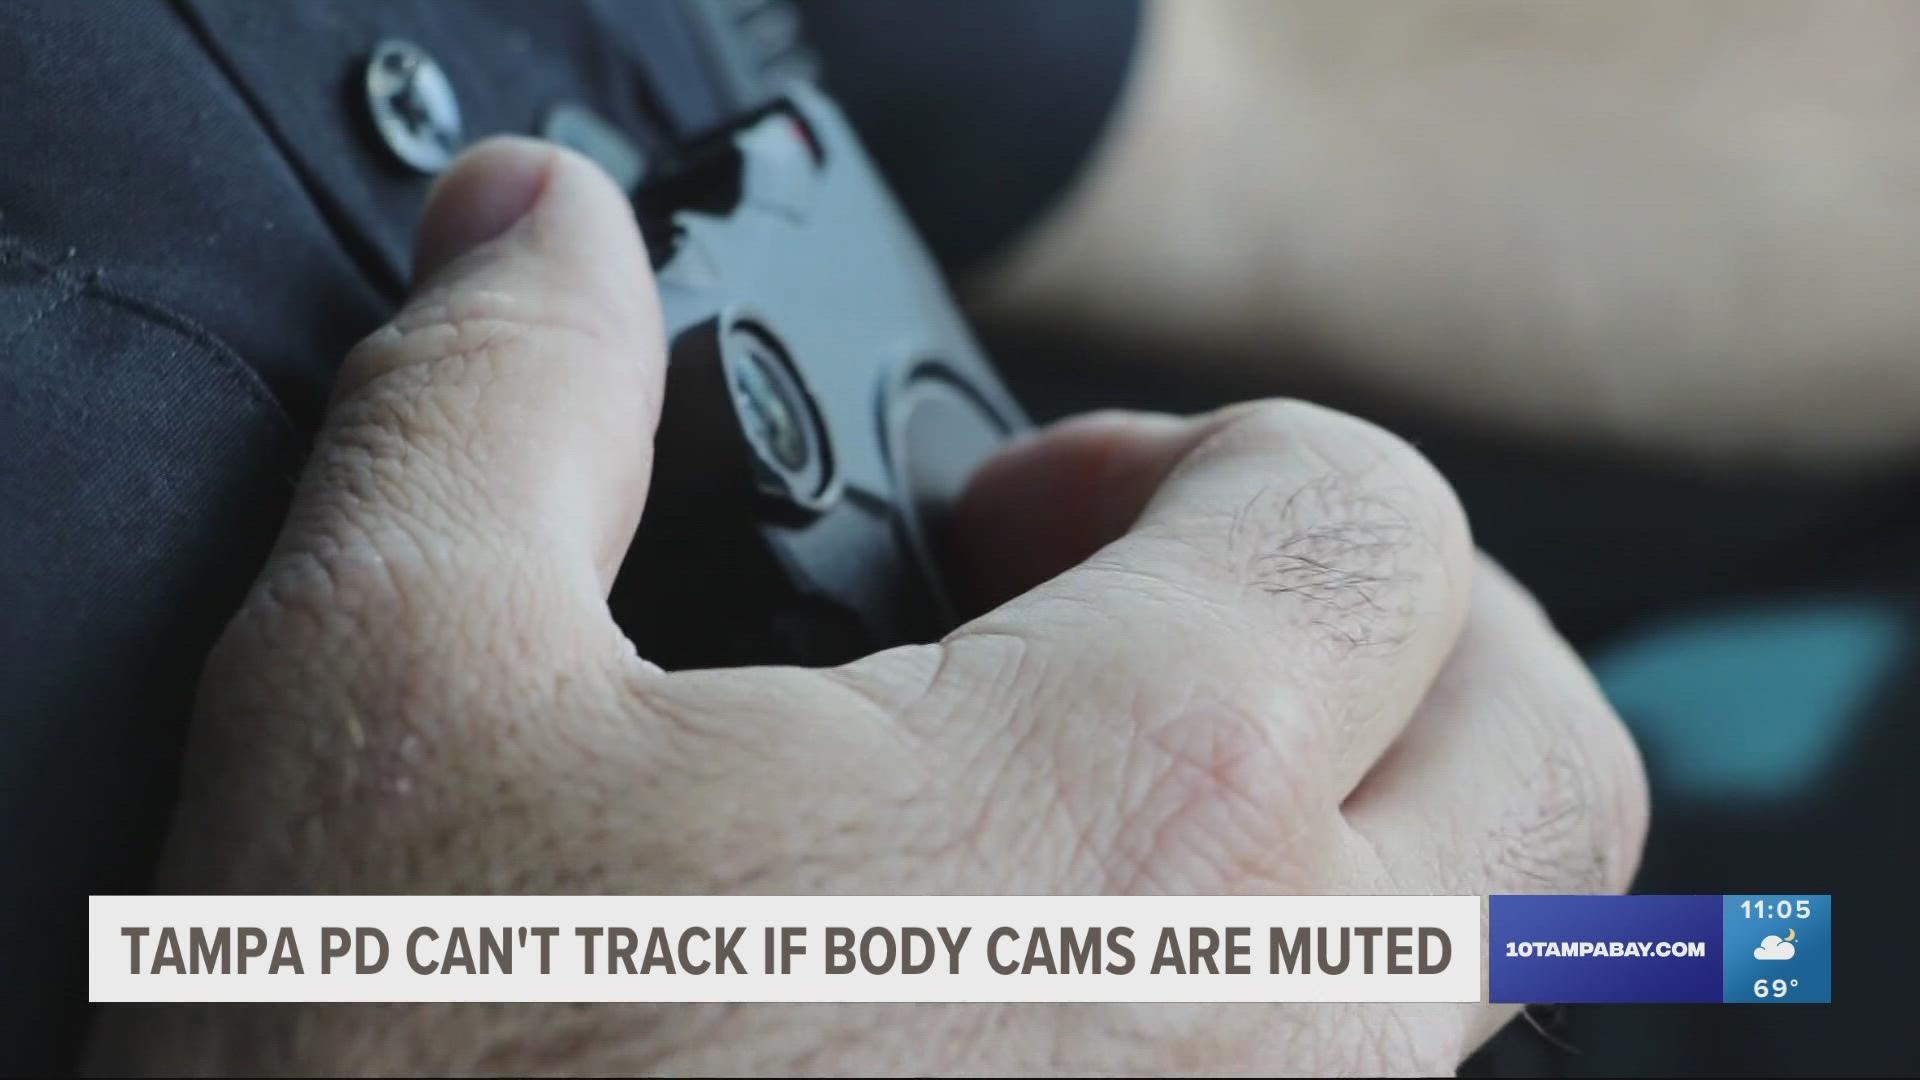 Axon, which creates the body cameras worn by Tampa police officers, said it can only track when cameras are muted or in "sleep mode" through individual audits.